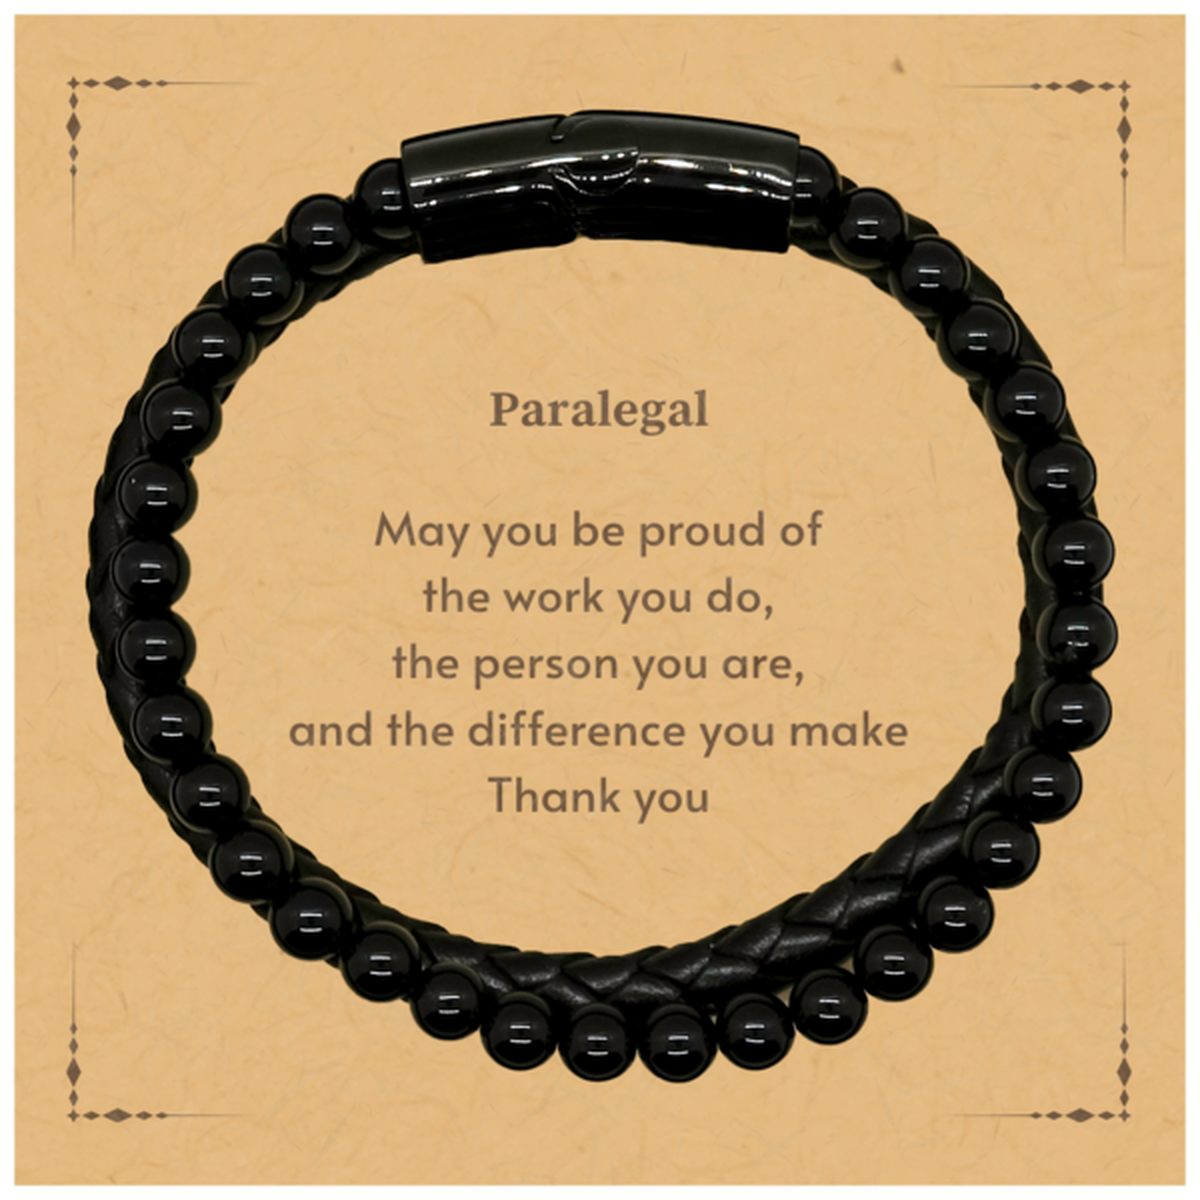 Heartwarming Stone Leather Bracelets Retirement Coworkers Gifts for Paralegal, Paralegal May You be proud of the work you do, the person you are Gifts for Boss Men Women Friends